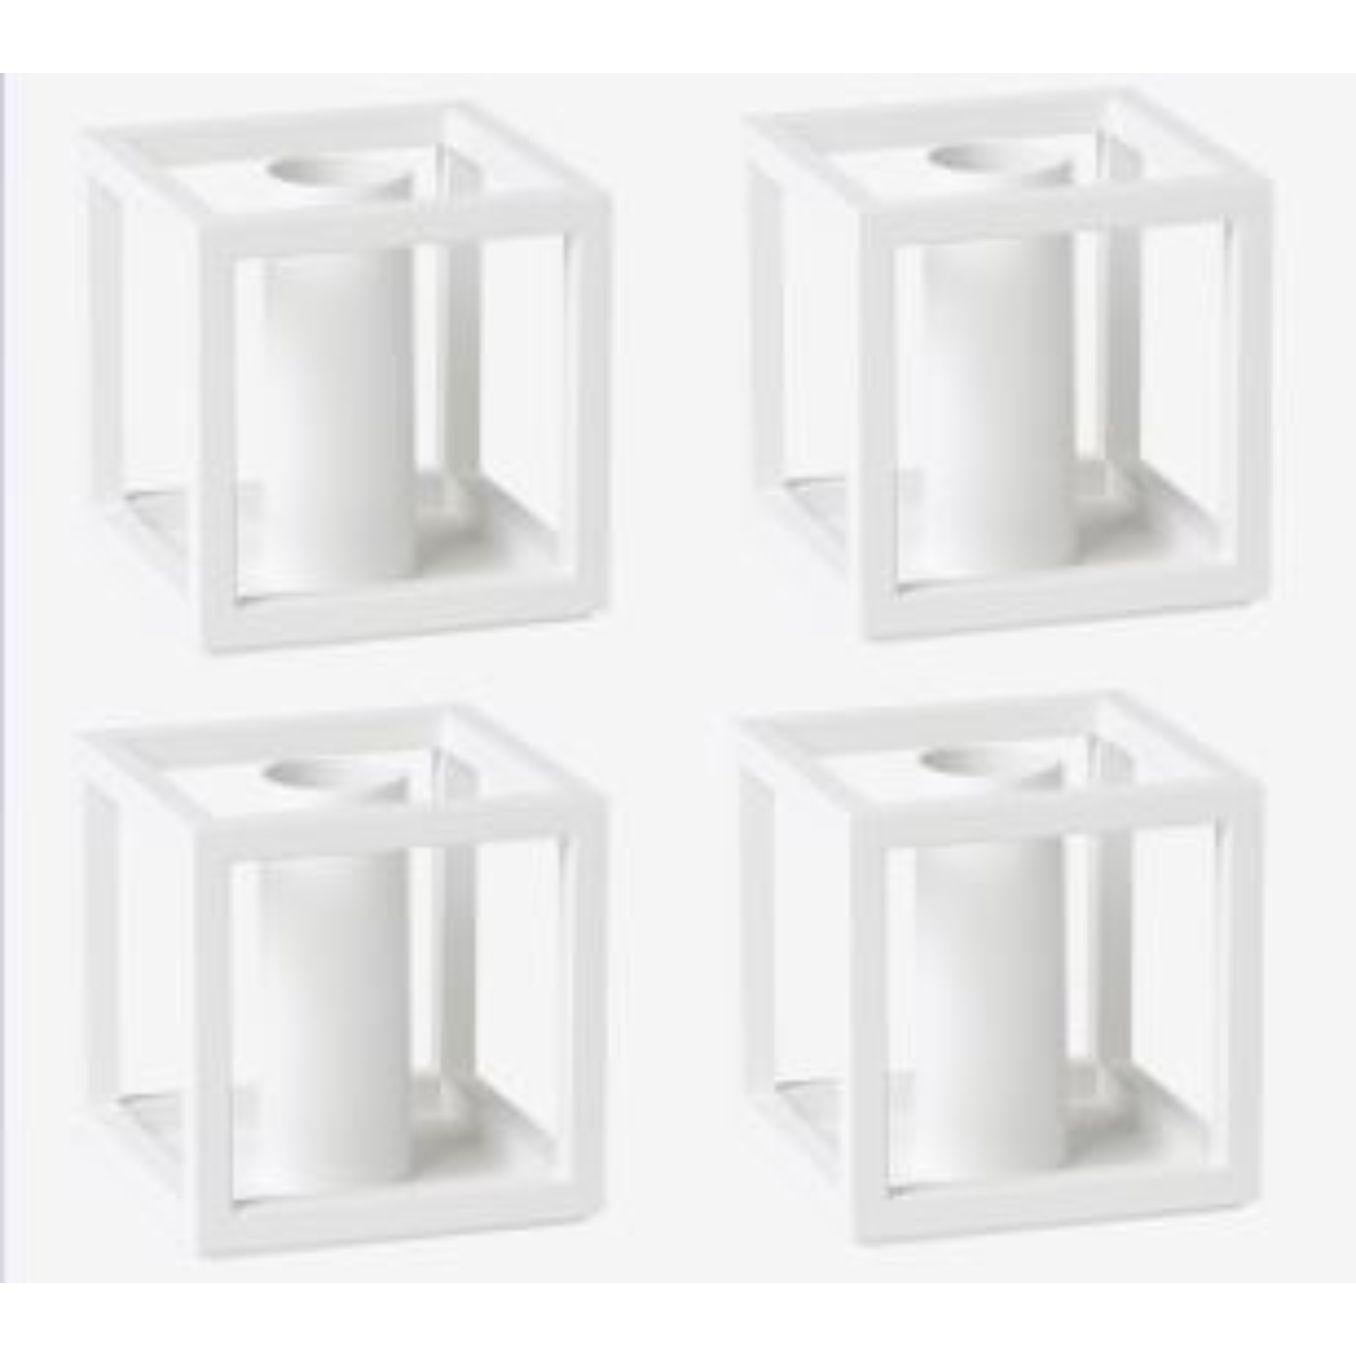 Set of 4 white Kubus 1 candle holders by Lassen
Dimensions: D 7 x W 7 x H 7 cm 
Materials: Metal 
Also available in different dimensions.
Weight: 0.40 Kg

A new small wonder has seen the light of day. Kubus Micro is a stylish, smaller version